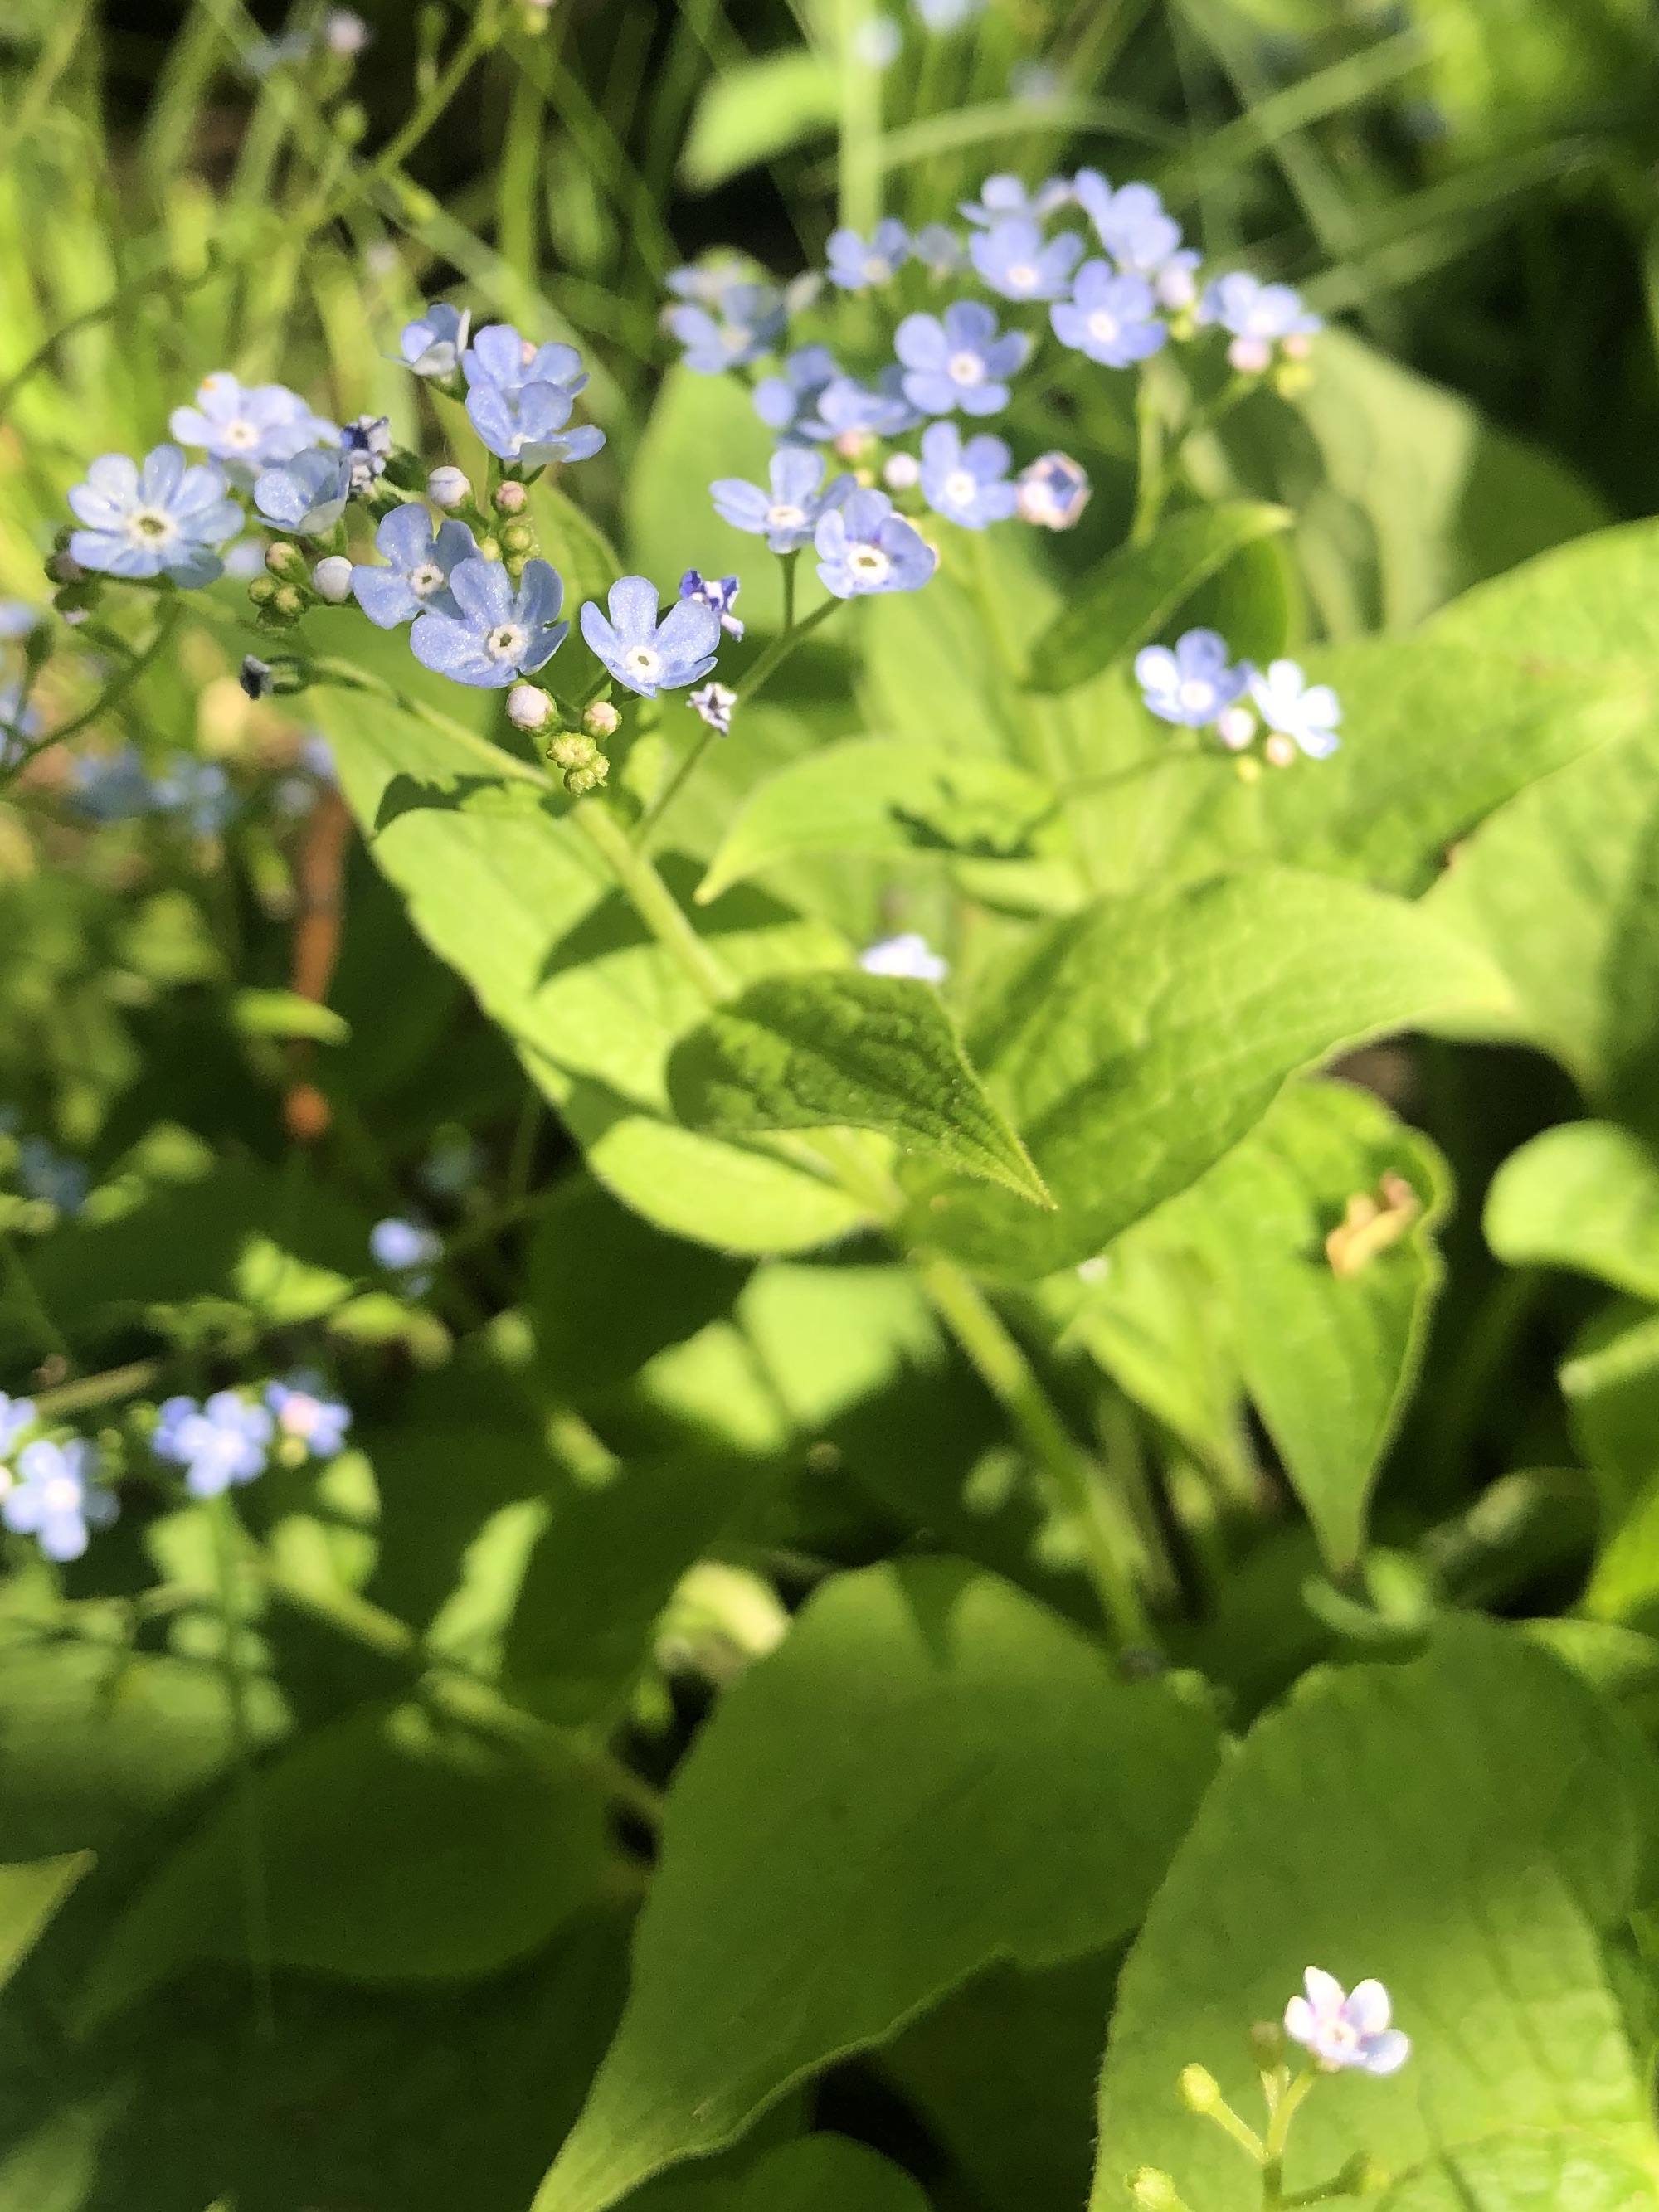 False Forget-Me-Not in the Thoreau Rain Garden in Madison, Wisconsin on May 16, 2022